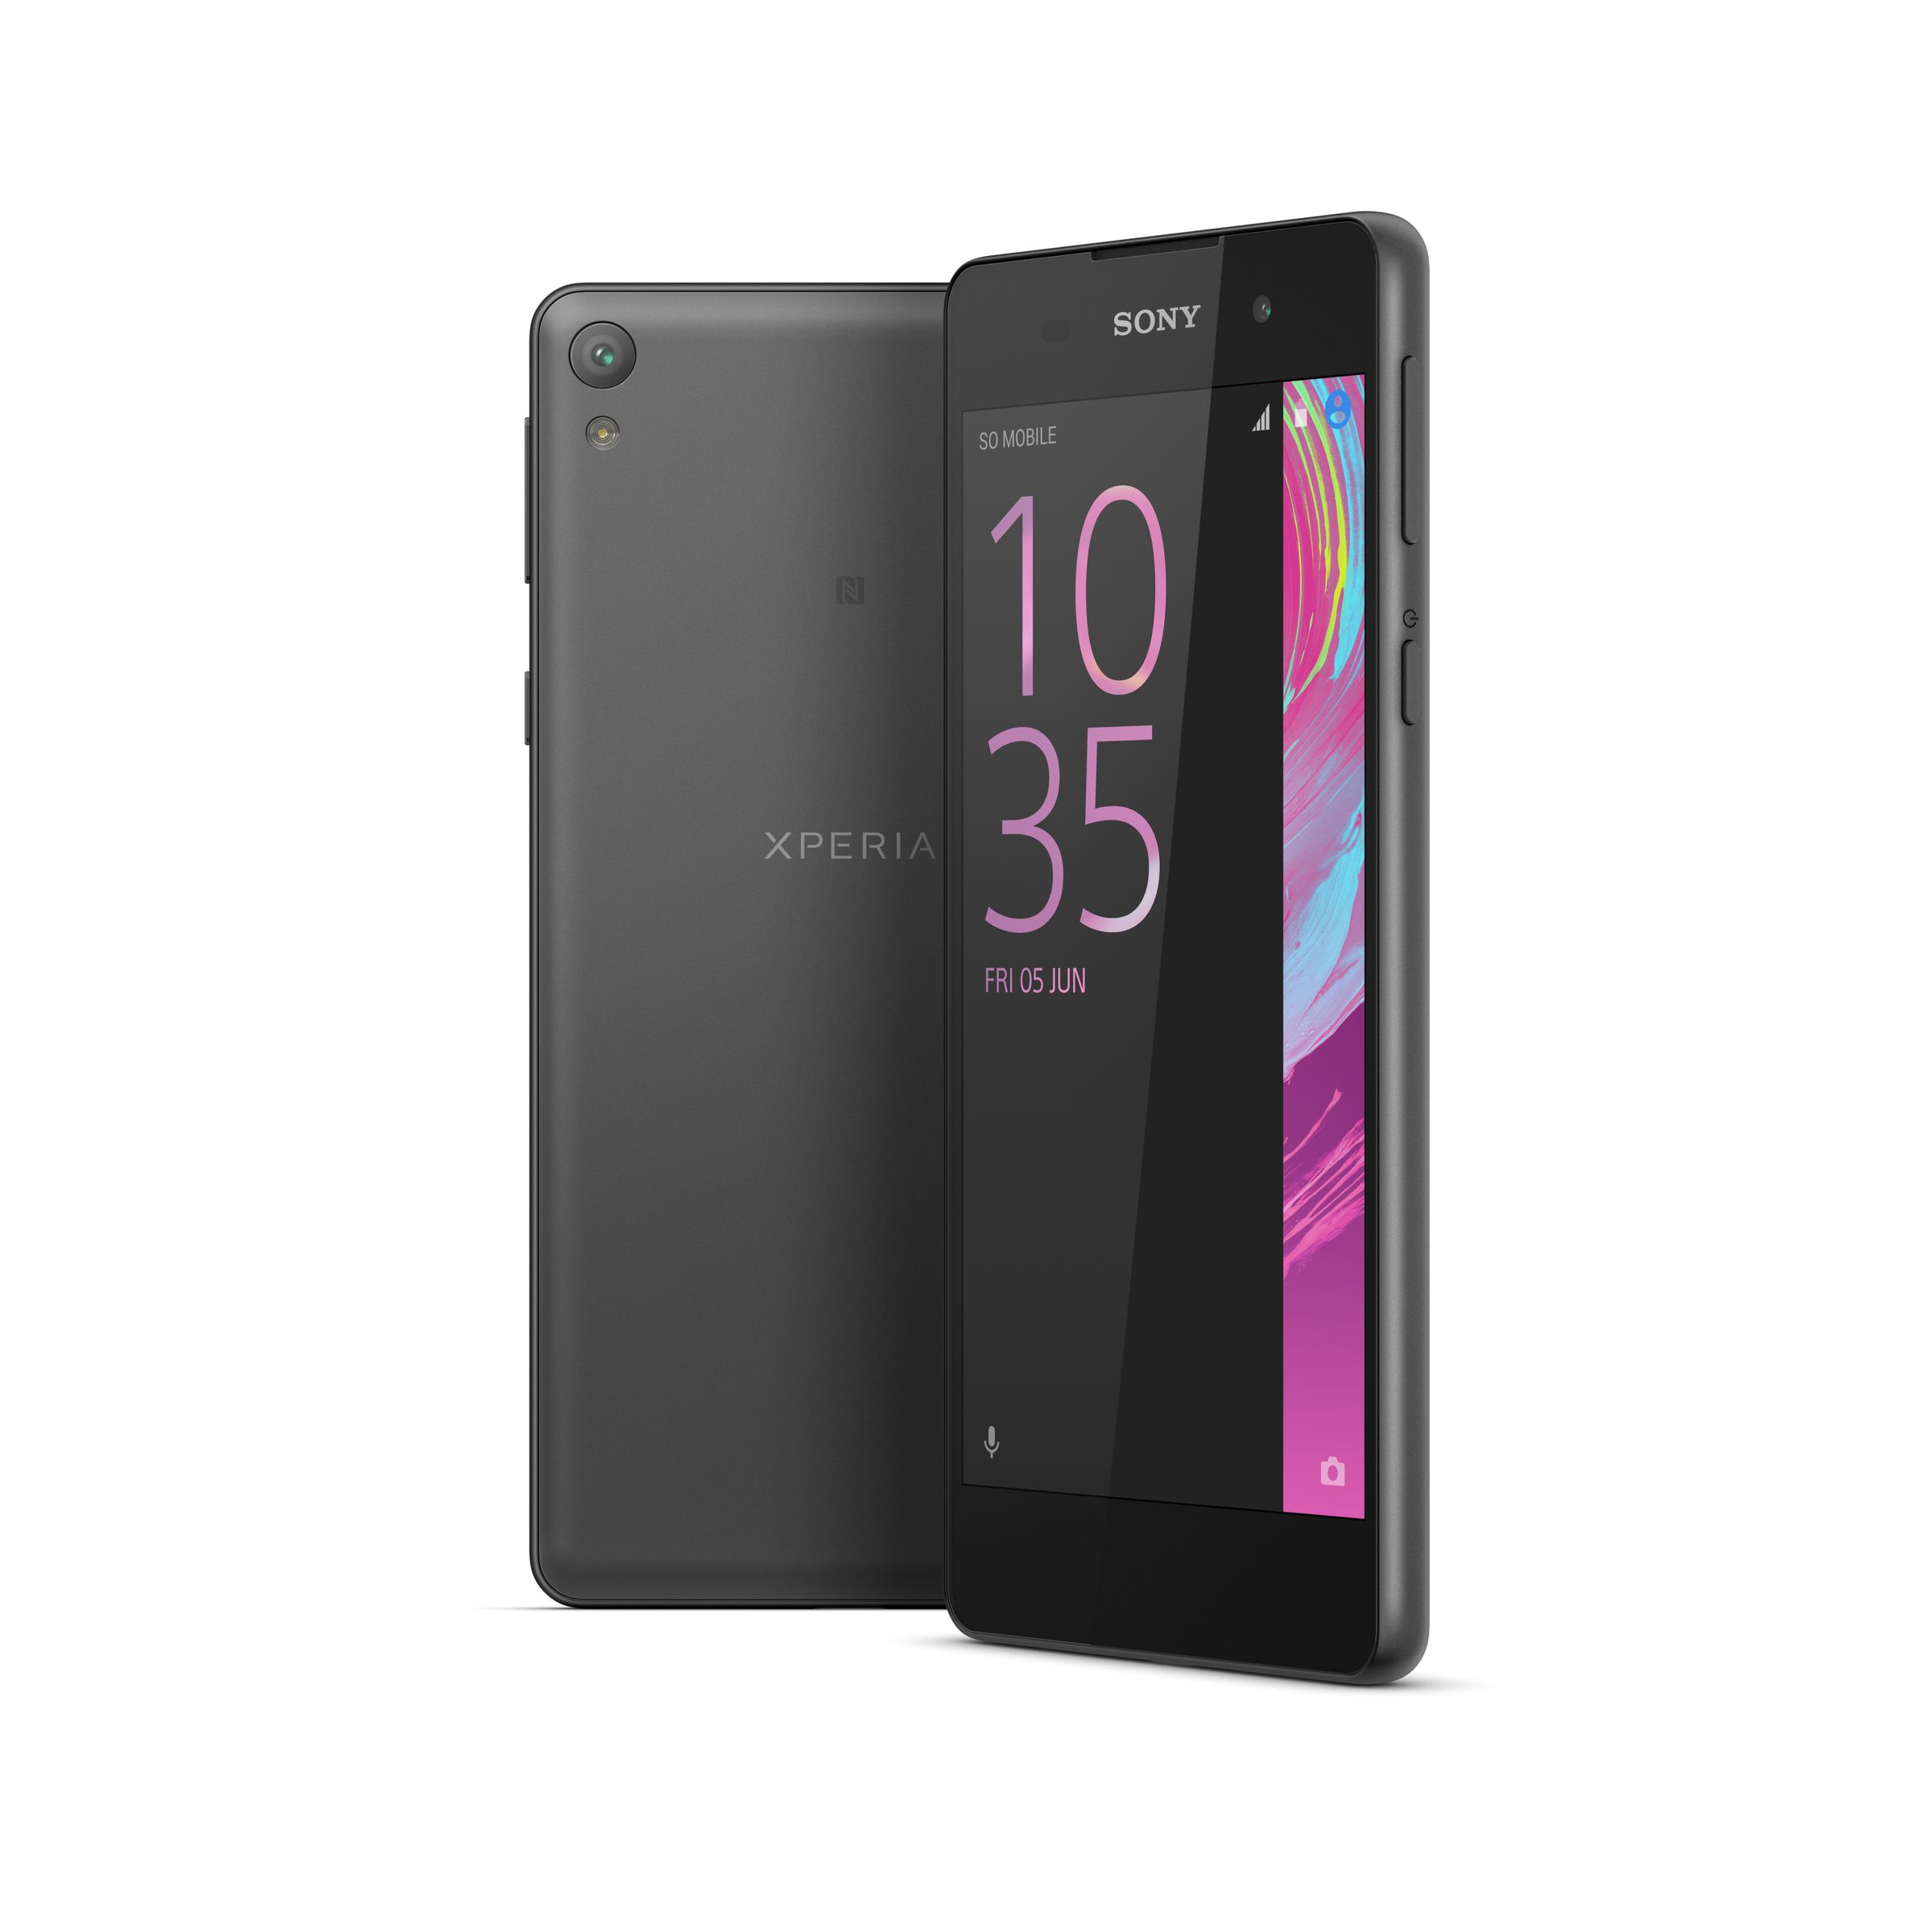 Sony officially unveiled its Xperia E5